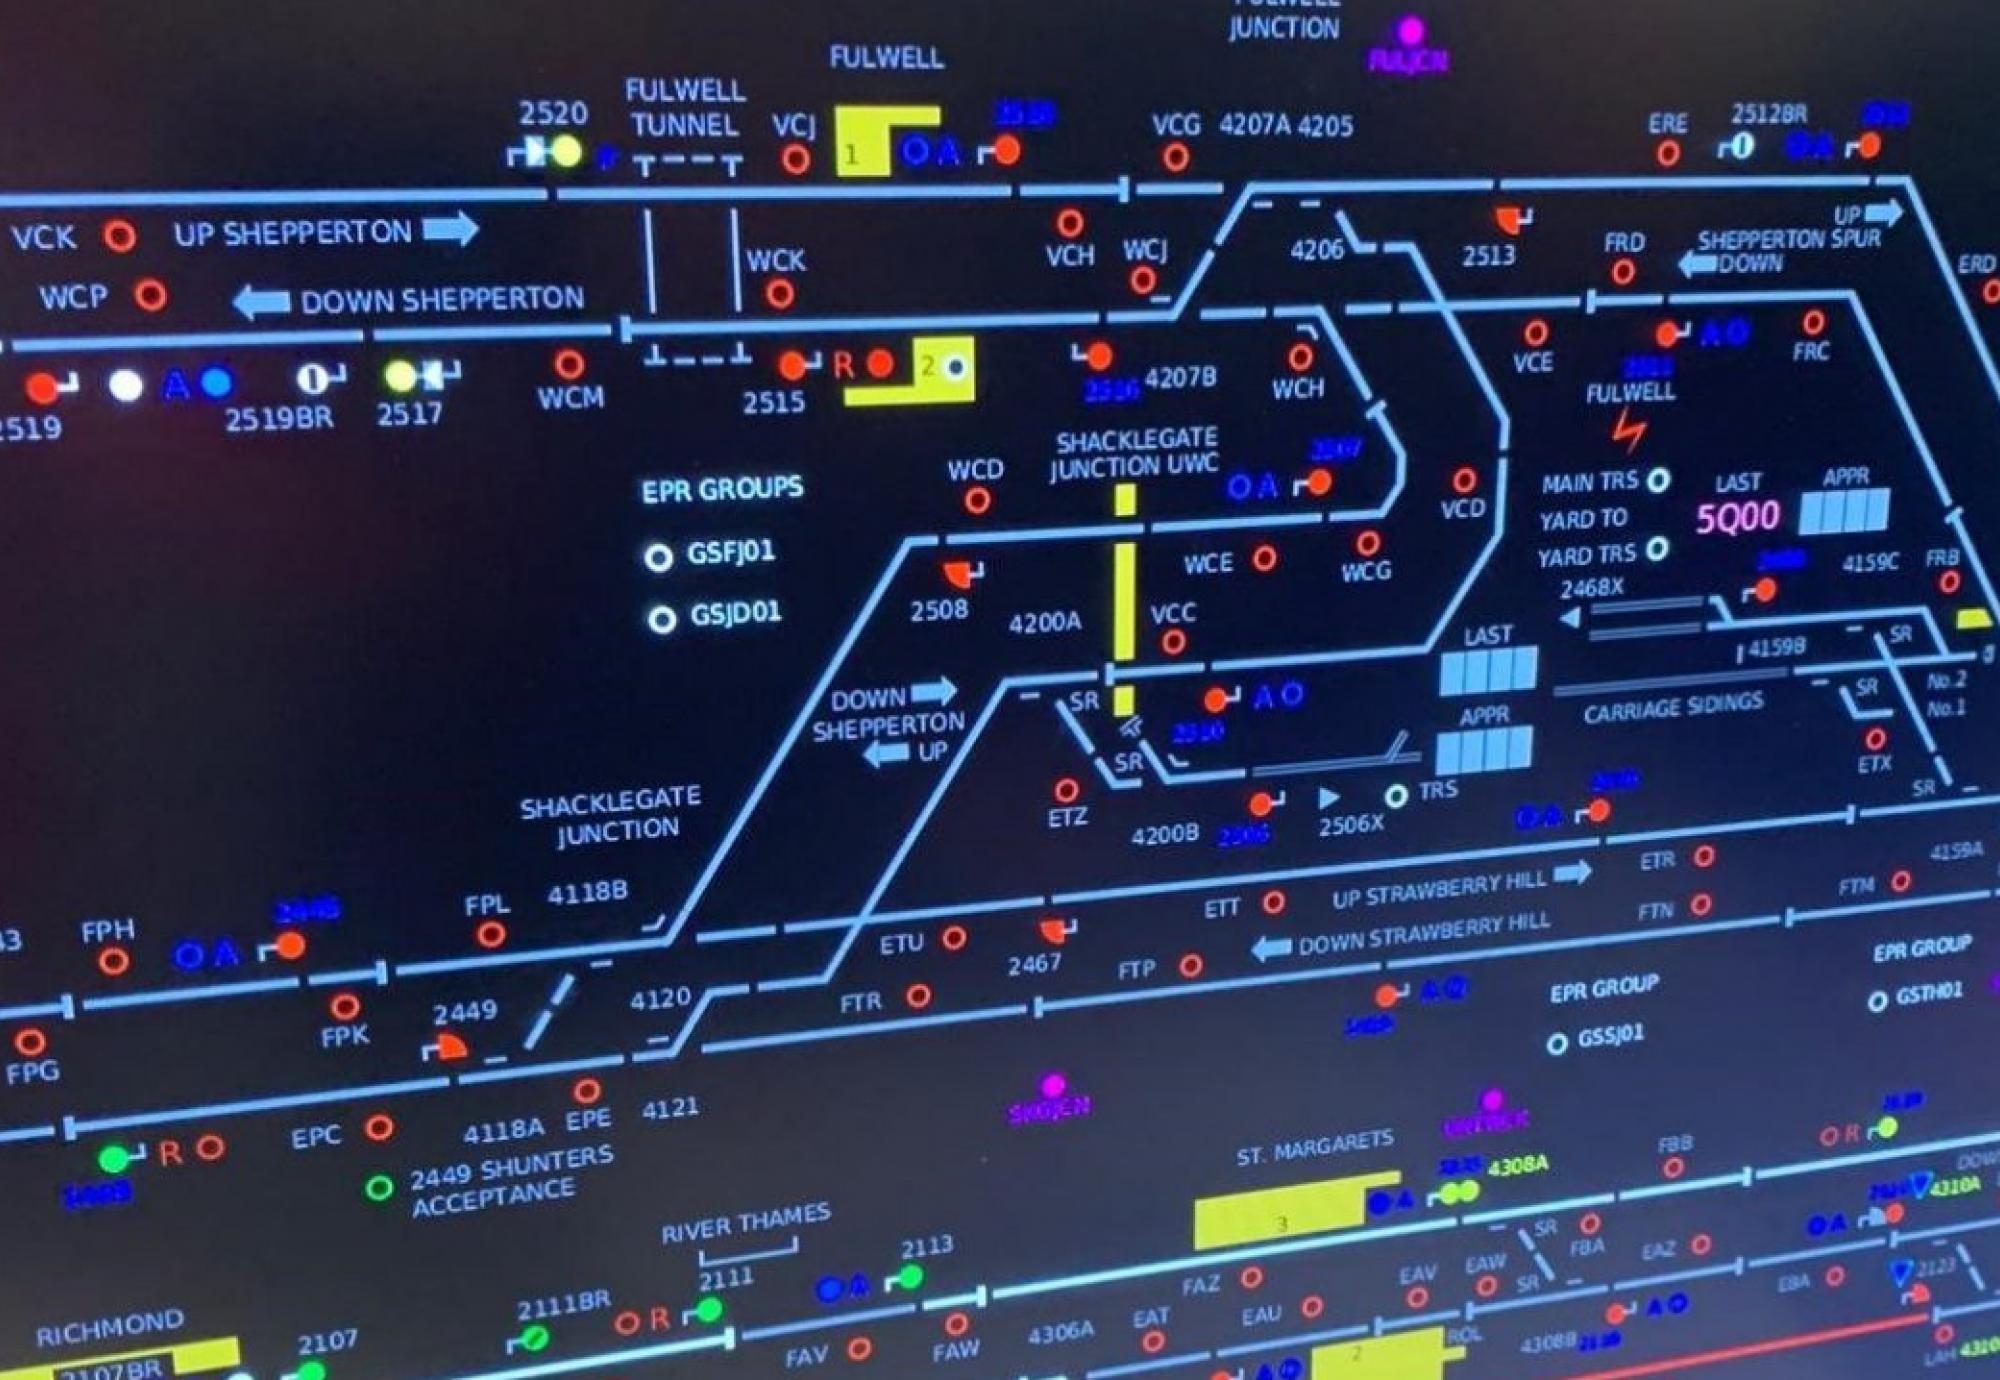 State of the art signalling system, via Network Rail 